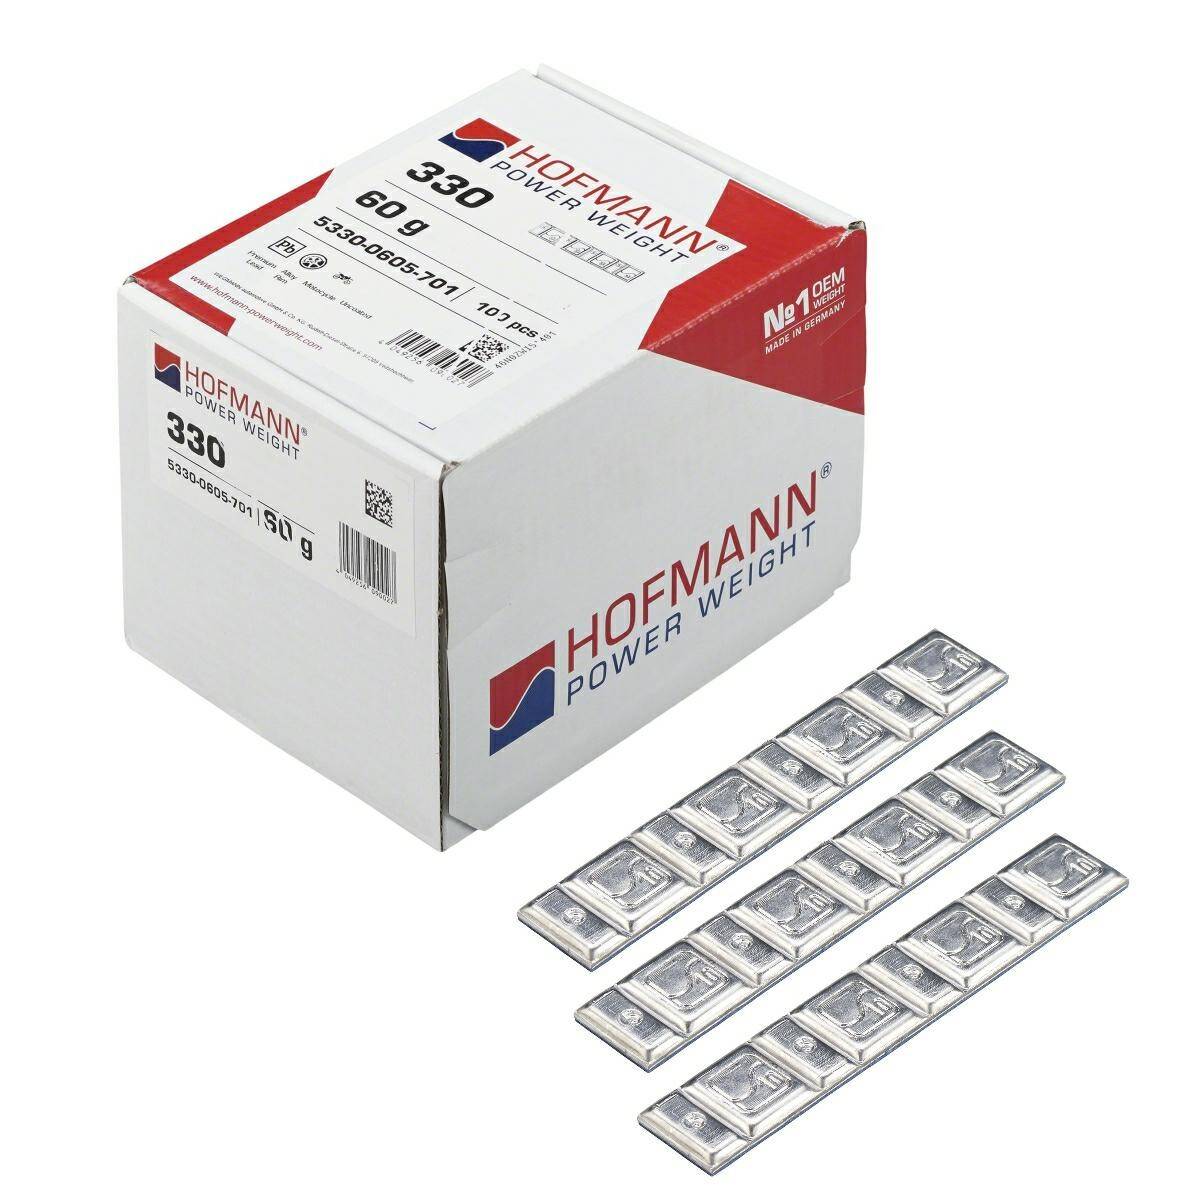 Adhesive Lead Weight Hofmann  Type 330-2/100 (Pb) 60g 4 x 5 and 4 x 10g - Pack of 100 (H330-2/100)